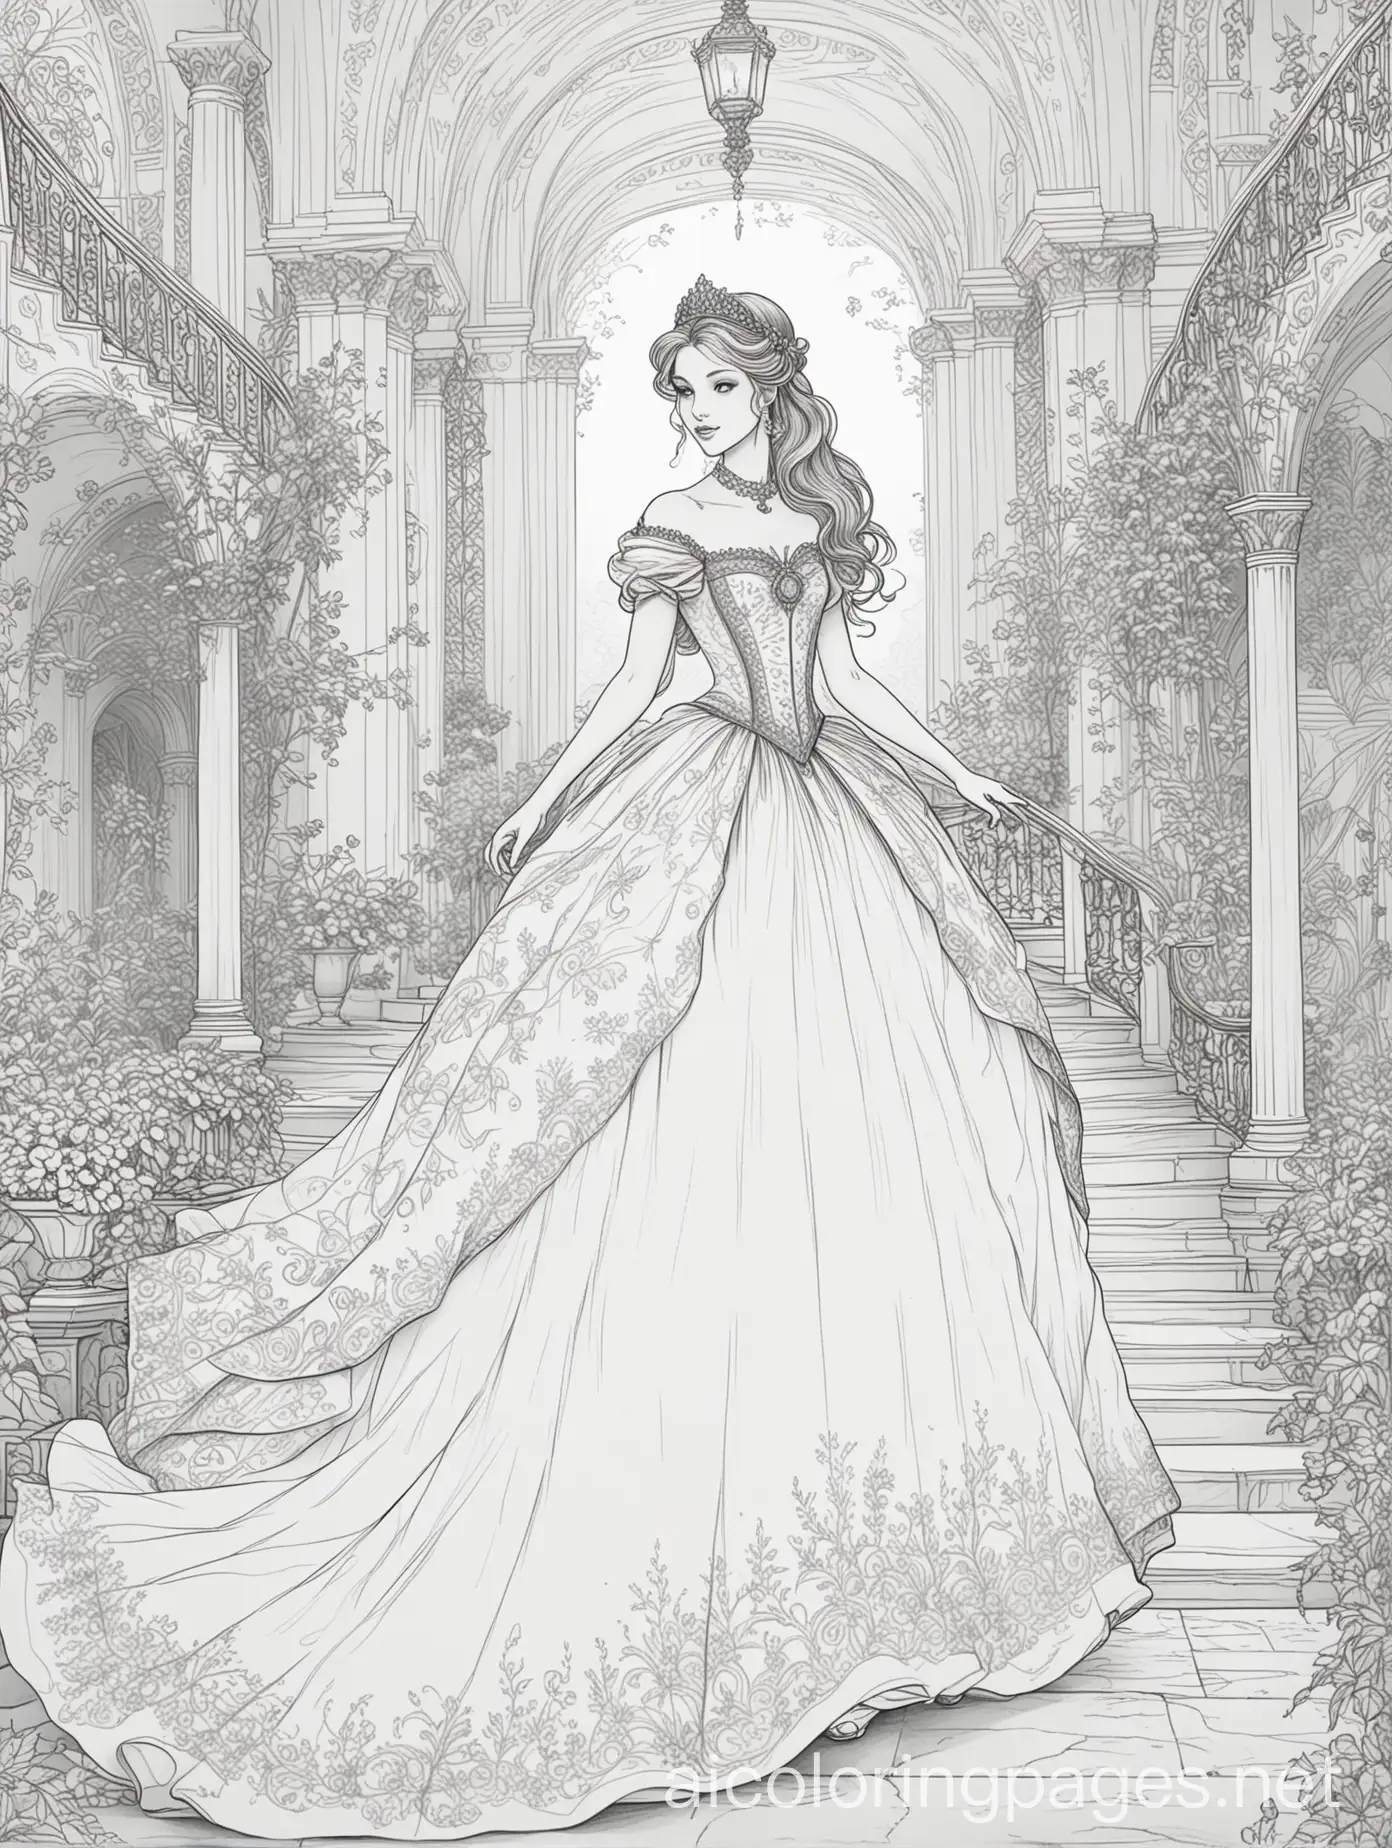 A fairy-tale princess who was invited to a ball at the palace by a prince, Coloring Page, black and white, line art, white background, Simplicity, Ample White Space.